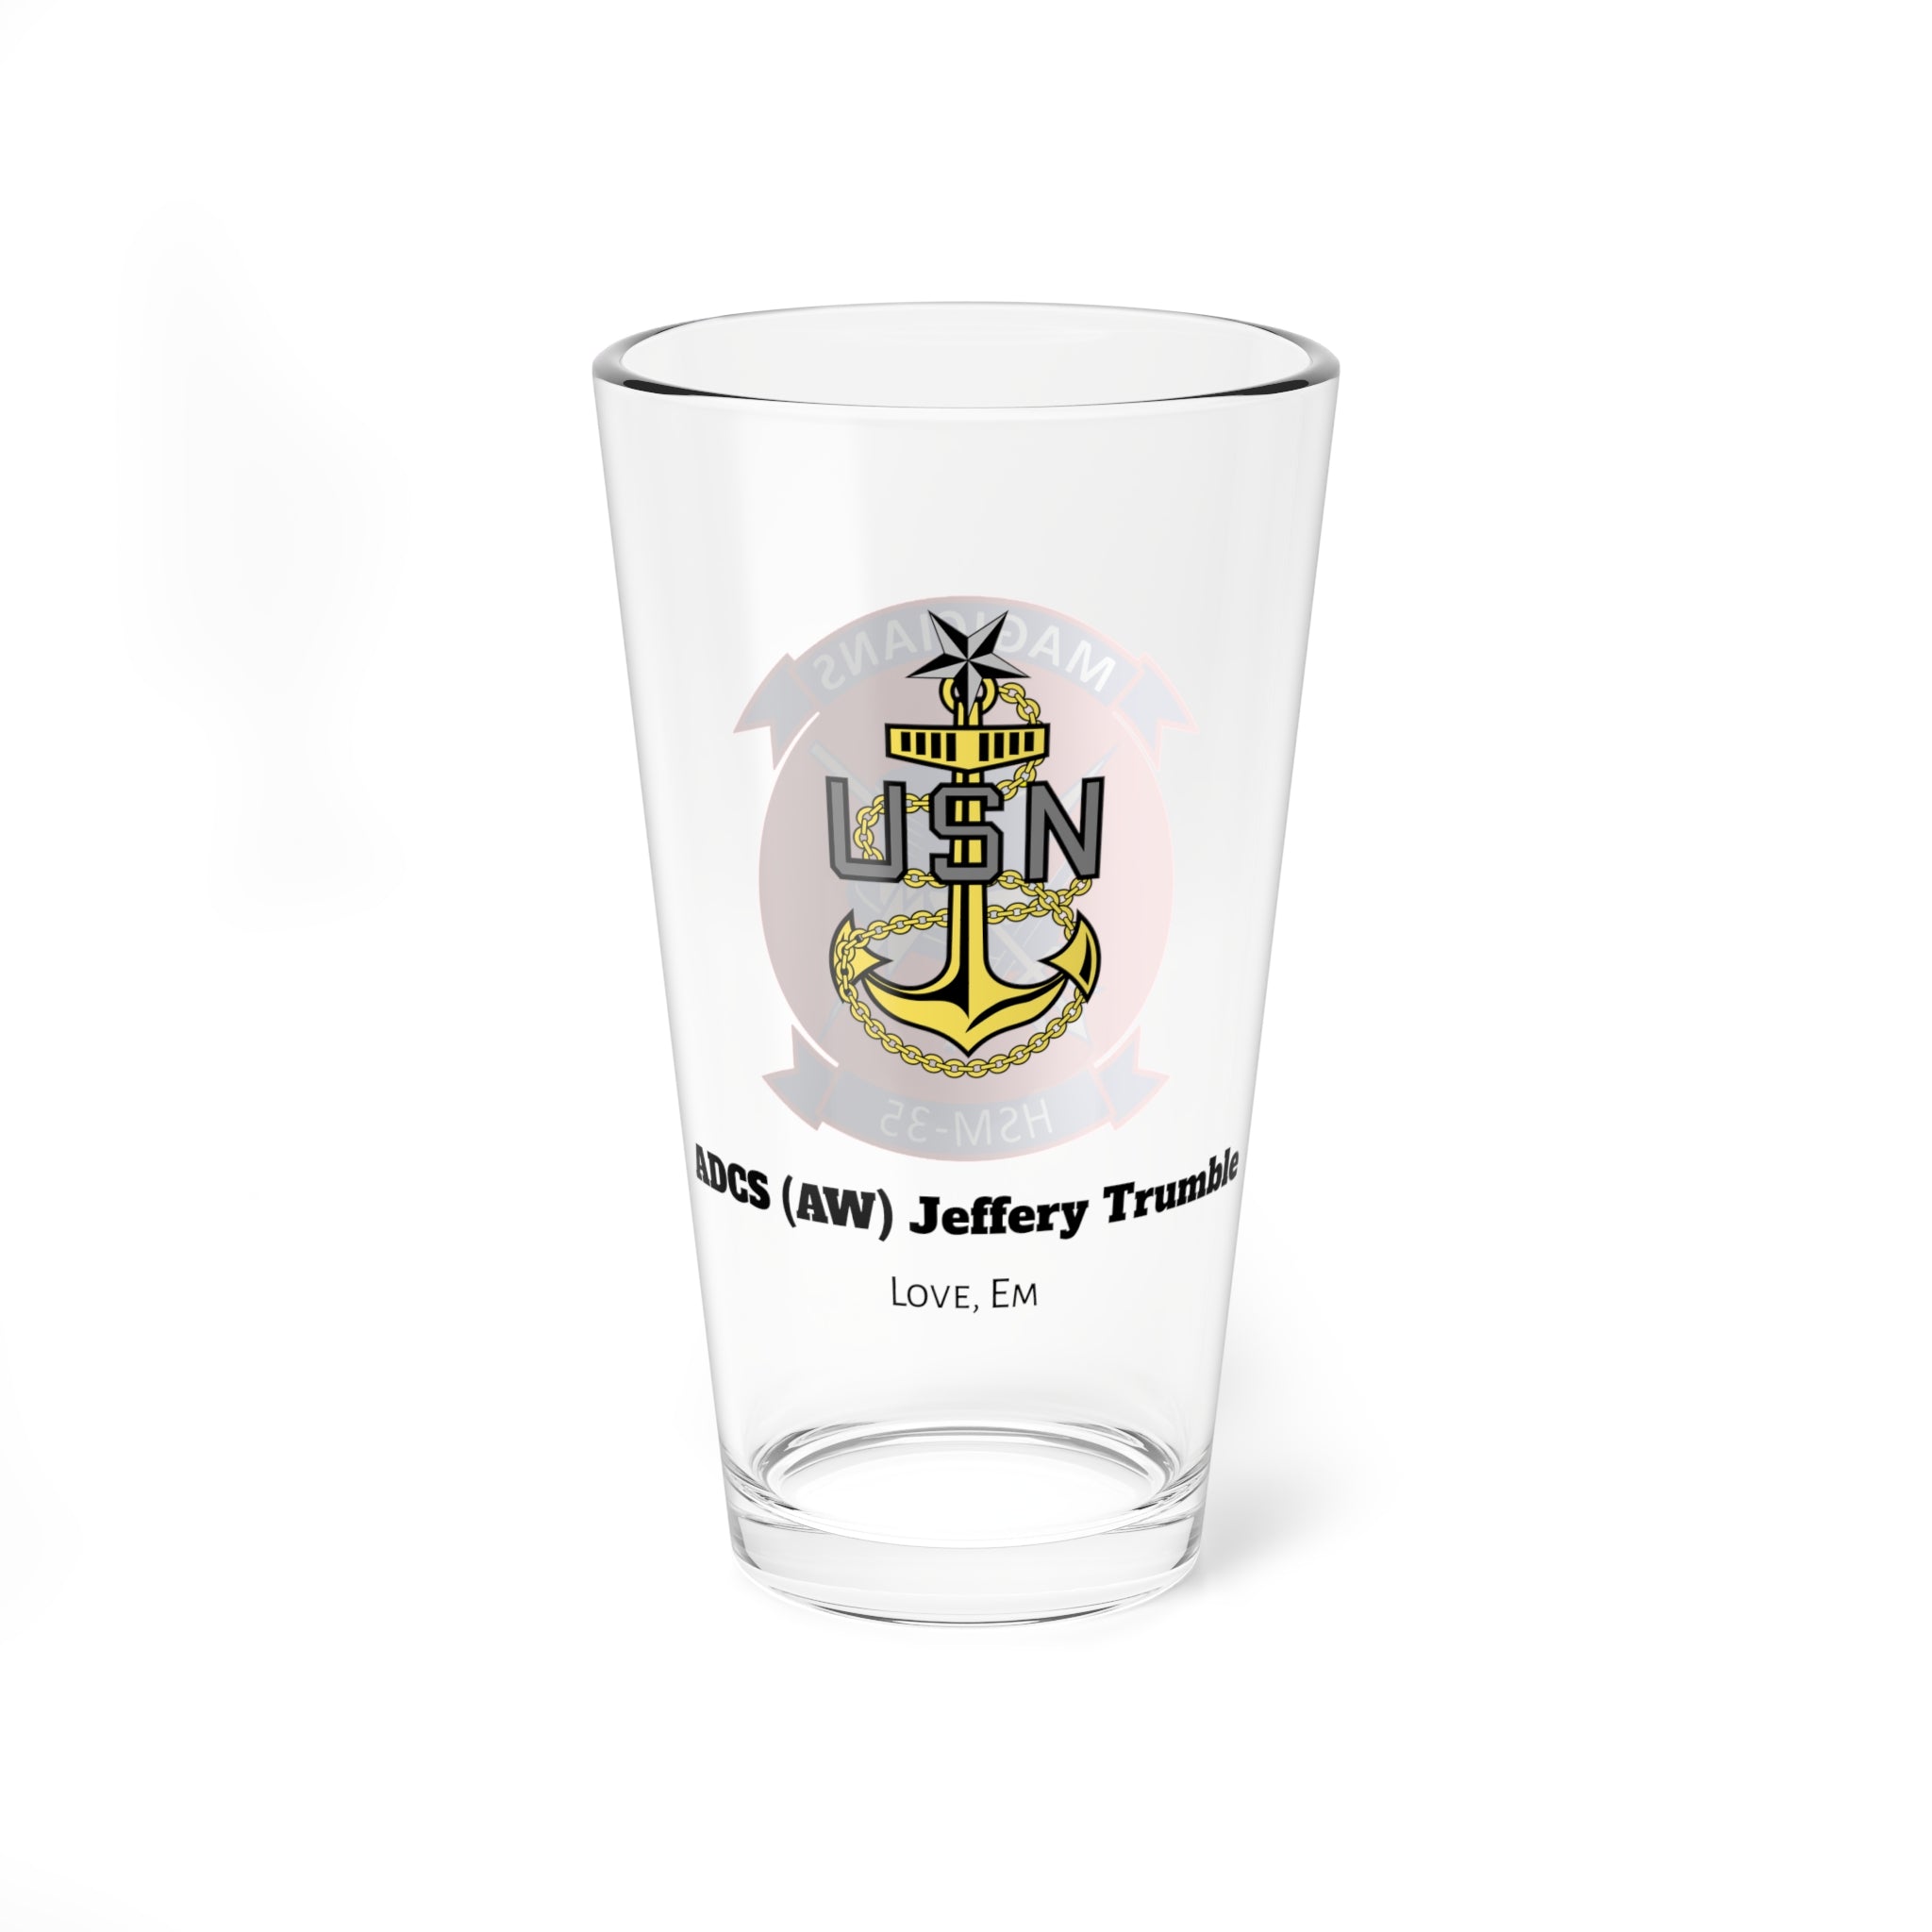 Personalized HSM-35 "Magicians" ADCS Trumble Pint Glass, 16oz, Navy Helicopter Maritime Strike Squadron flying the MH-60R